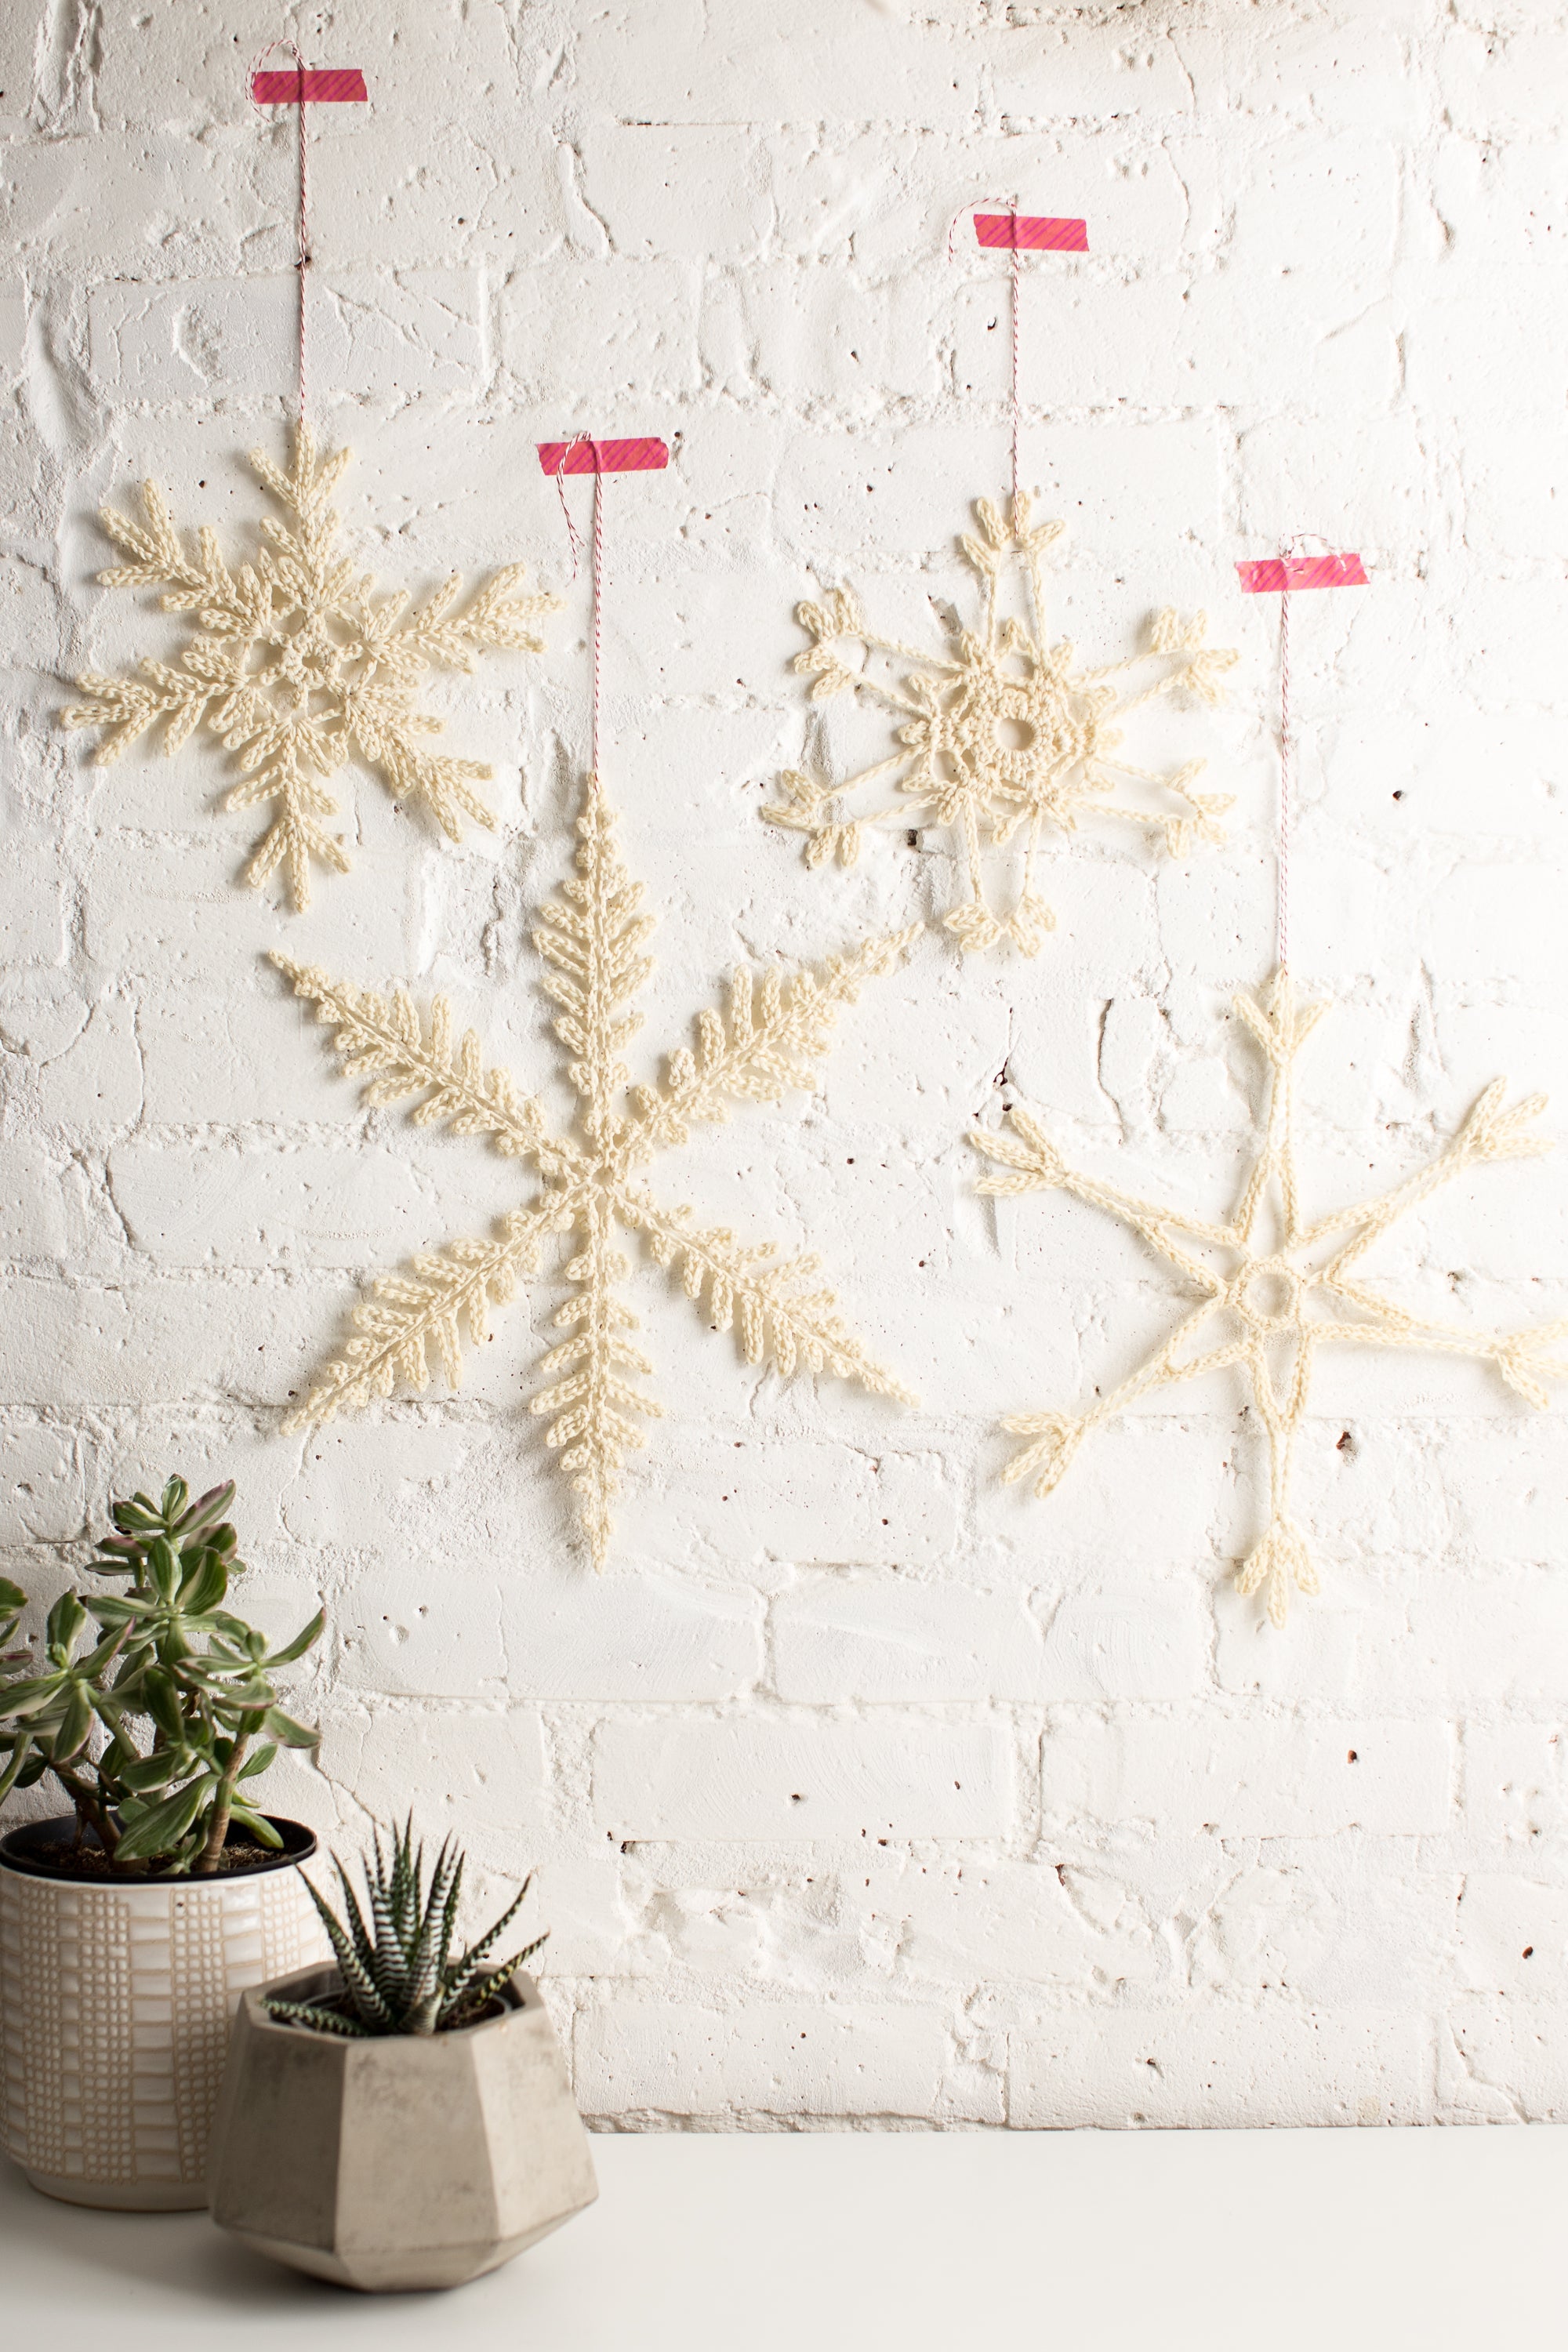 Giant Crocheted Snowflakes For The Holidays